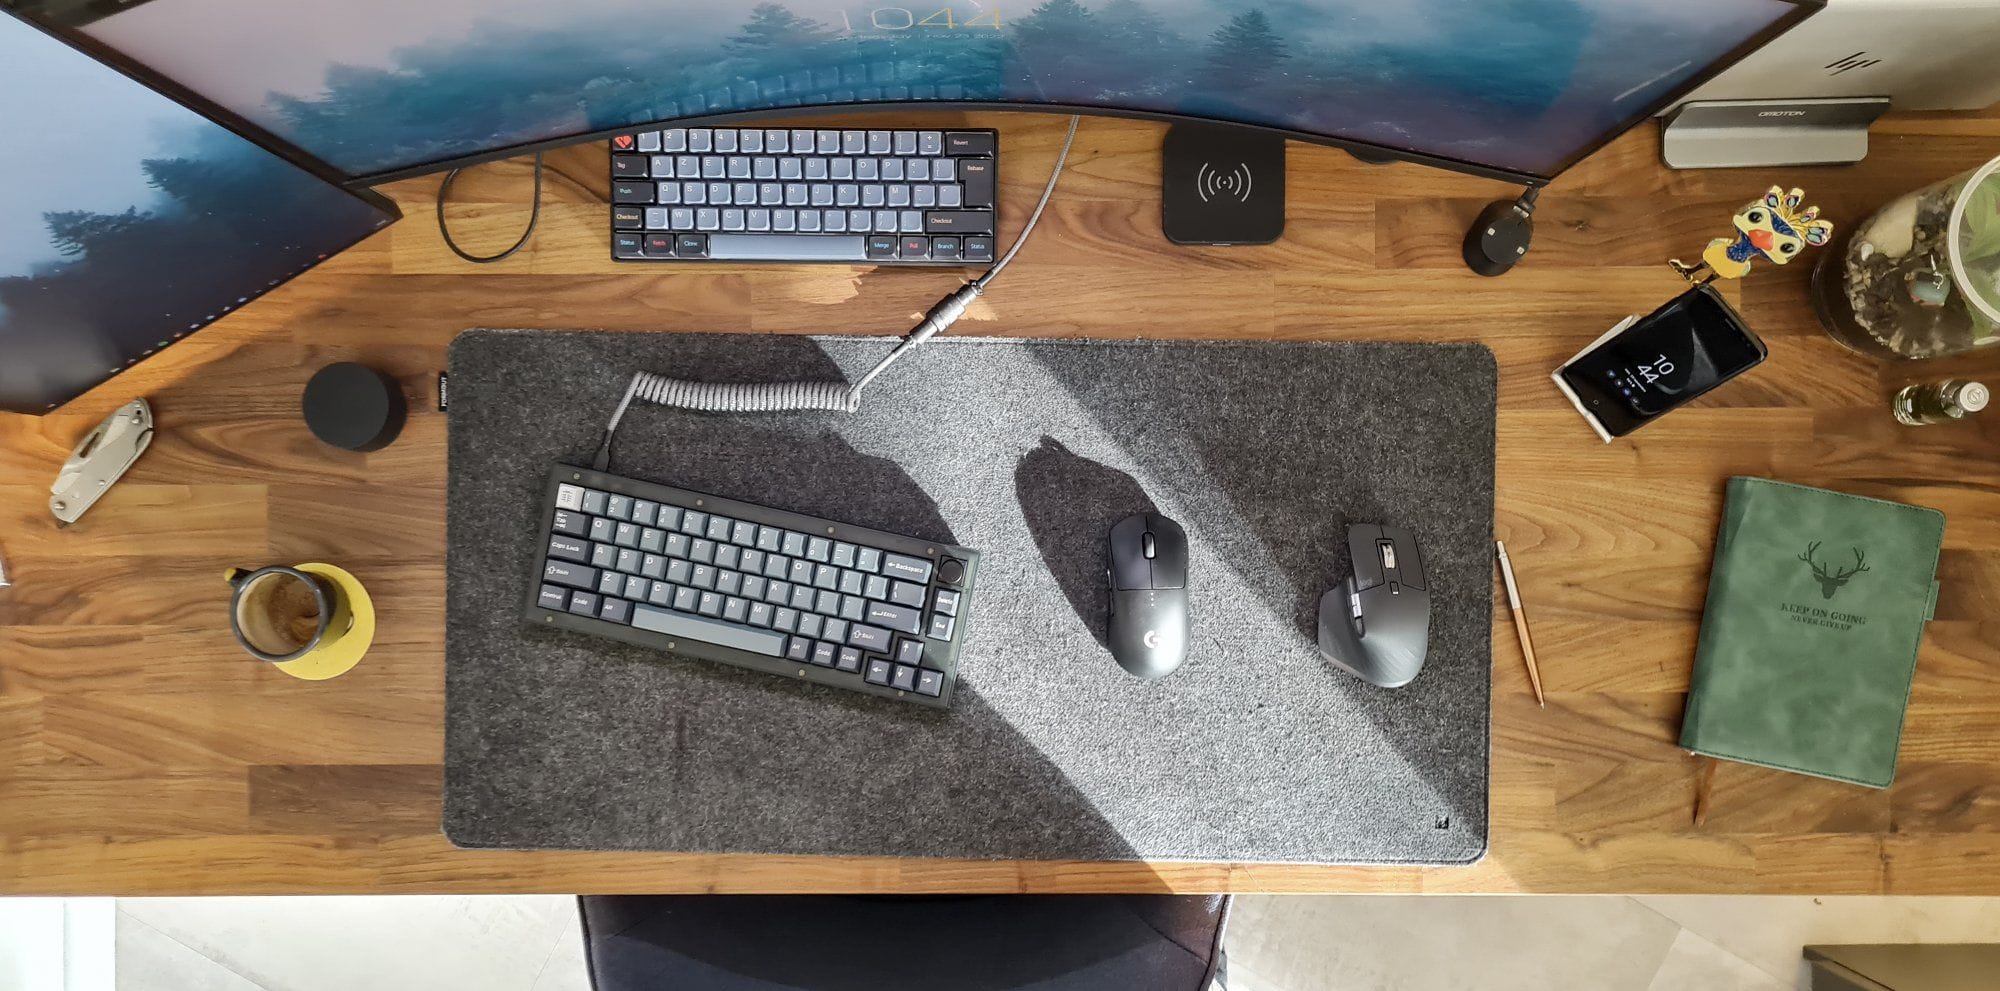 A top-down view of a desk setup featuring two mechanical keyboards, two Logitech mice on a grey felt desk mat, with a cup of coffee, smartphone, and green notebook arranged neatly on a wooden desk